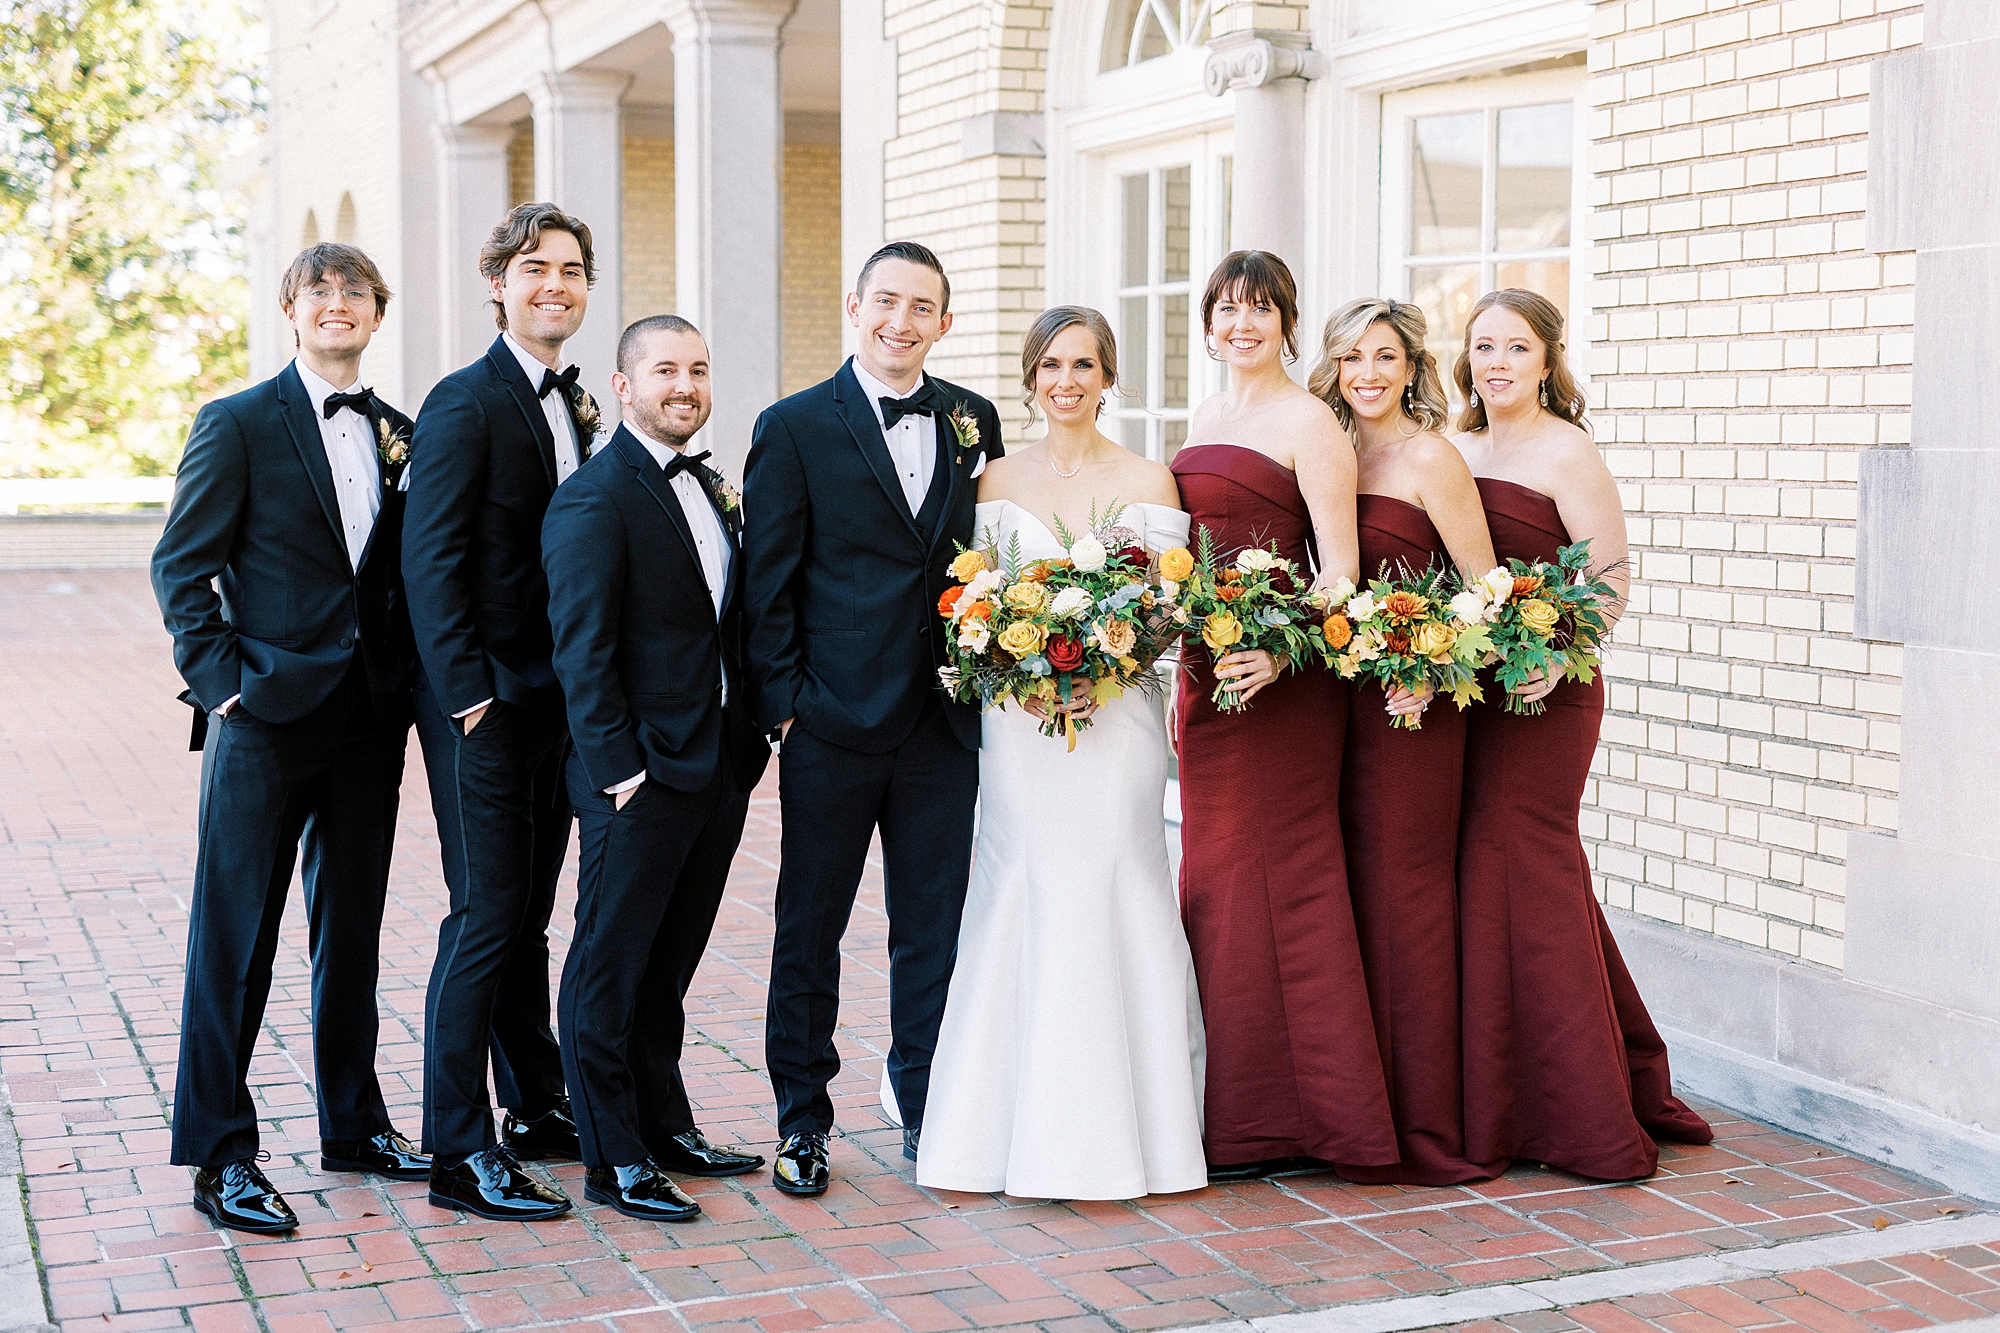 bride and groom pose with wedding party in red gown and black suits